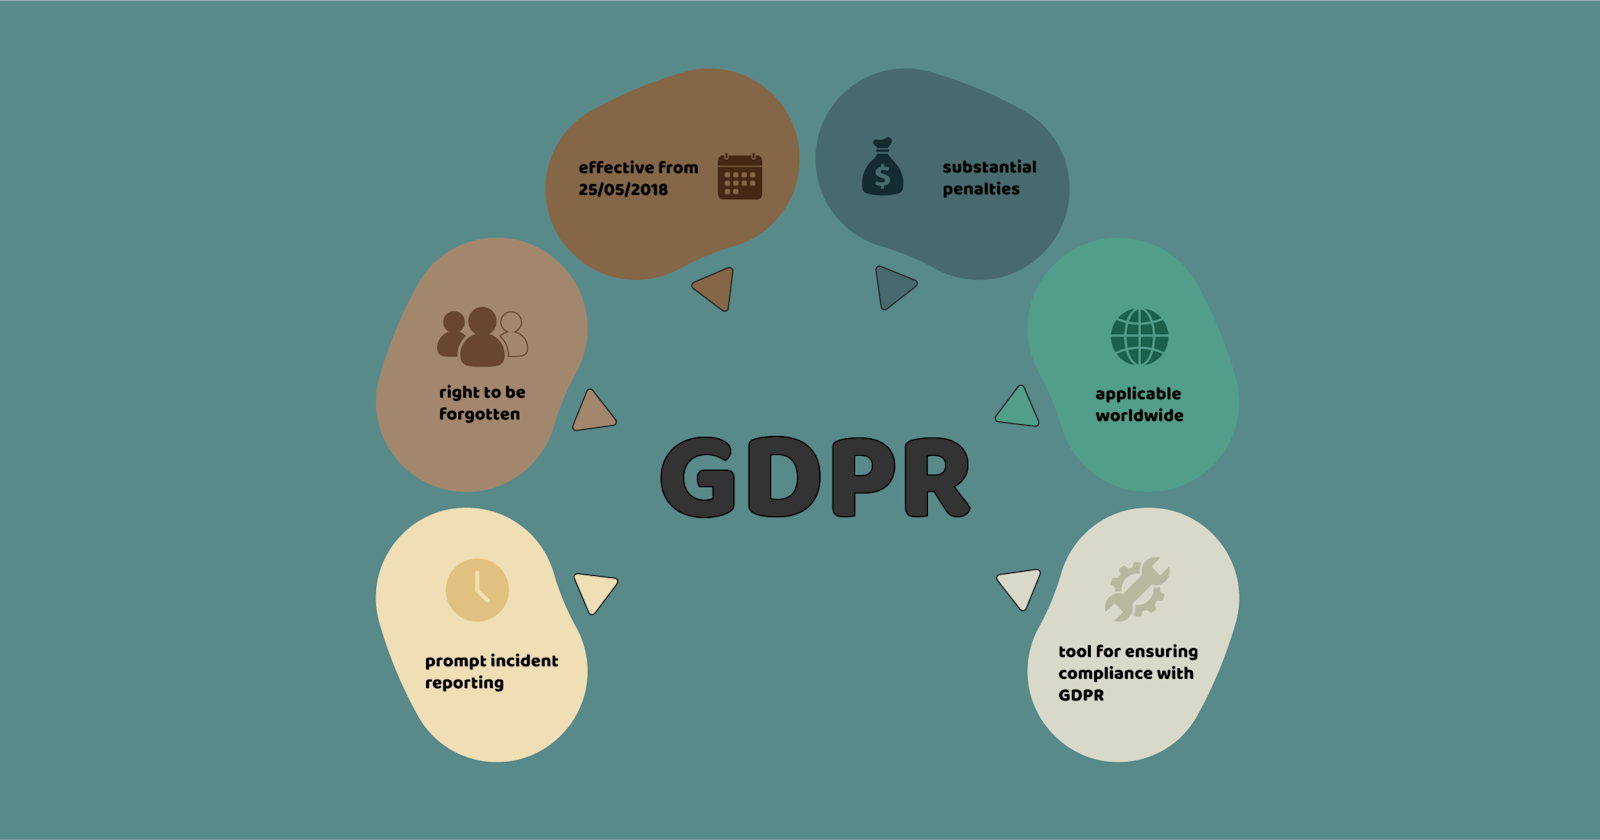 How Does the GDPR Affect Your Organization?